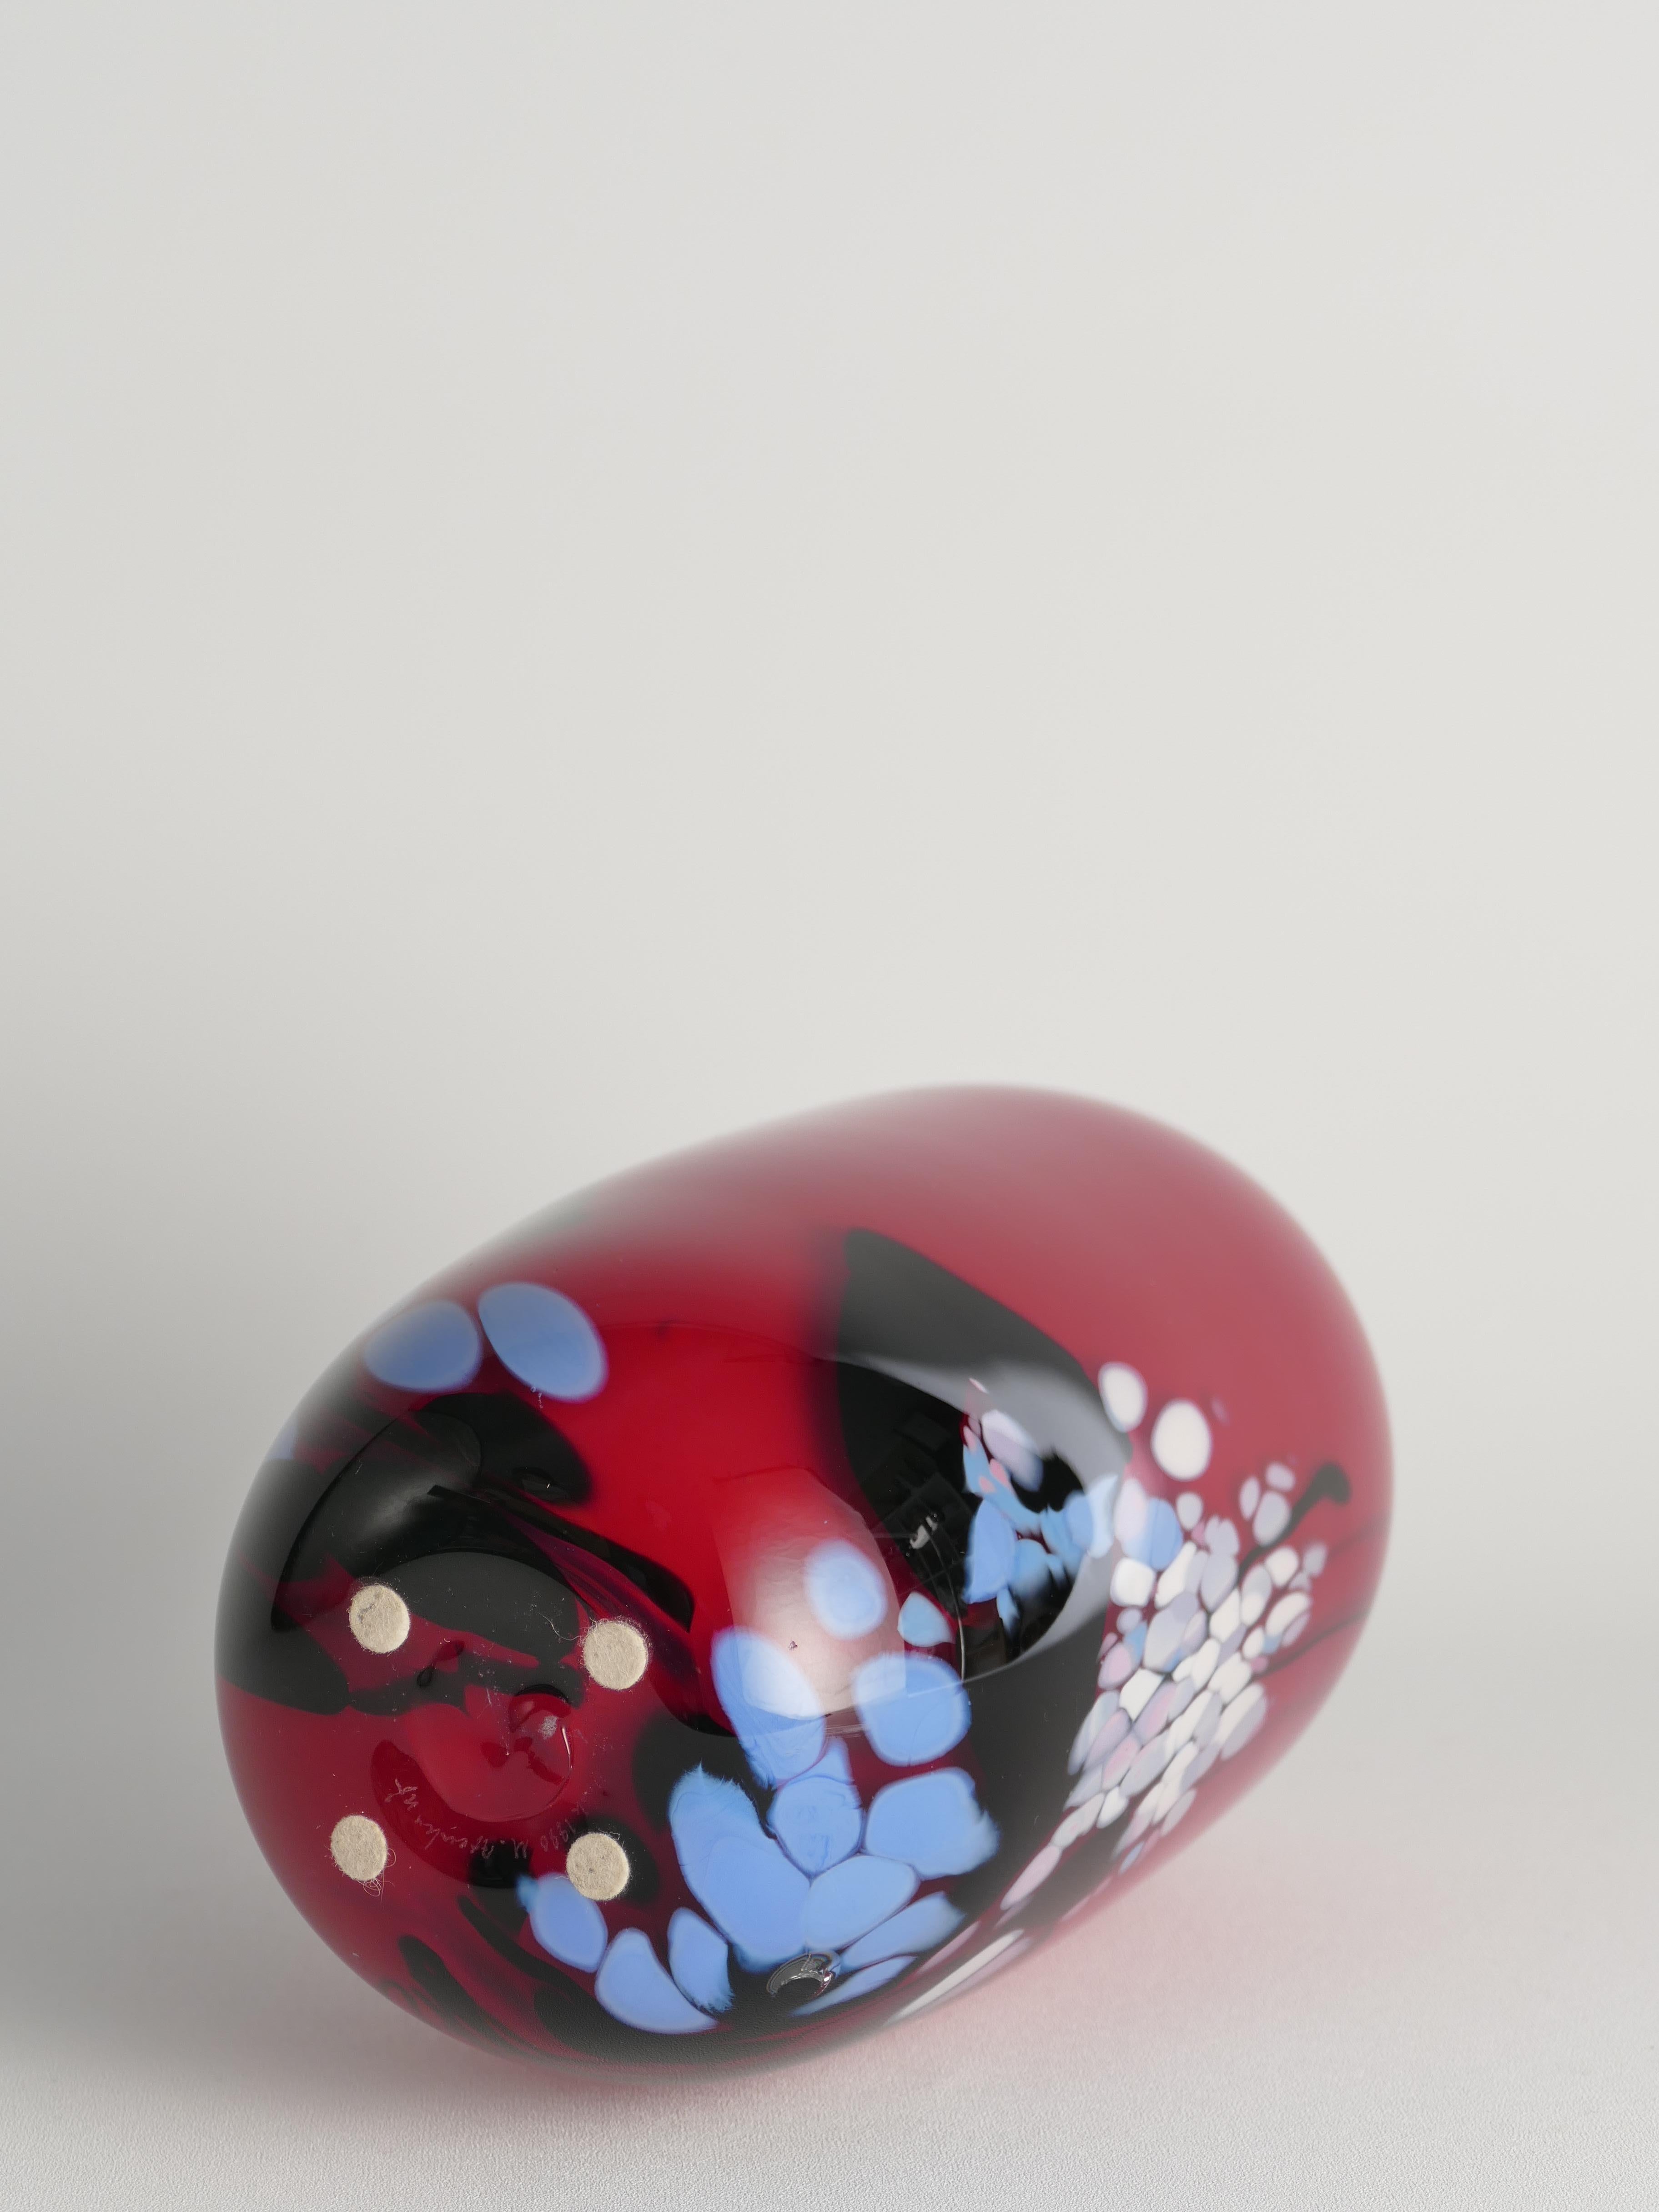 Unique Cherry Red Art Glass Vase by Mikael Axenbrant, Sweden 1990 For Sale 9